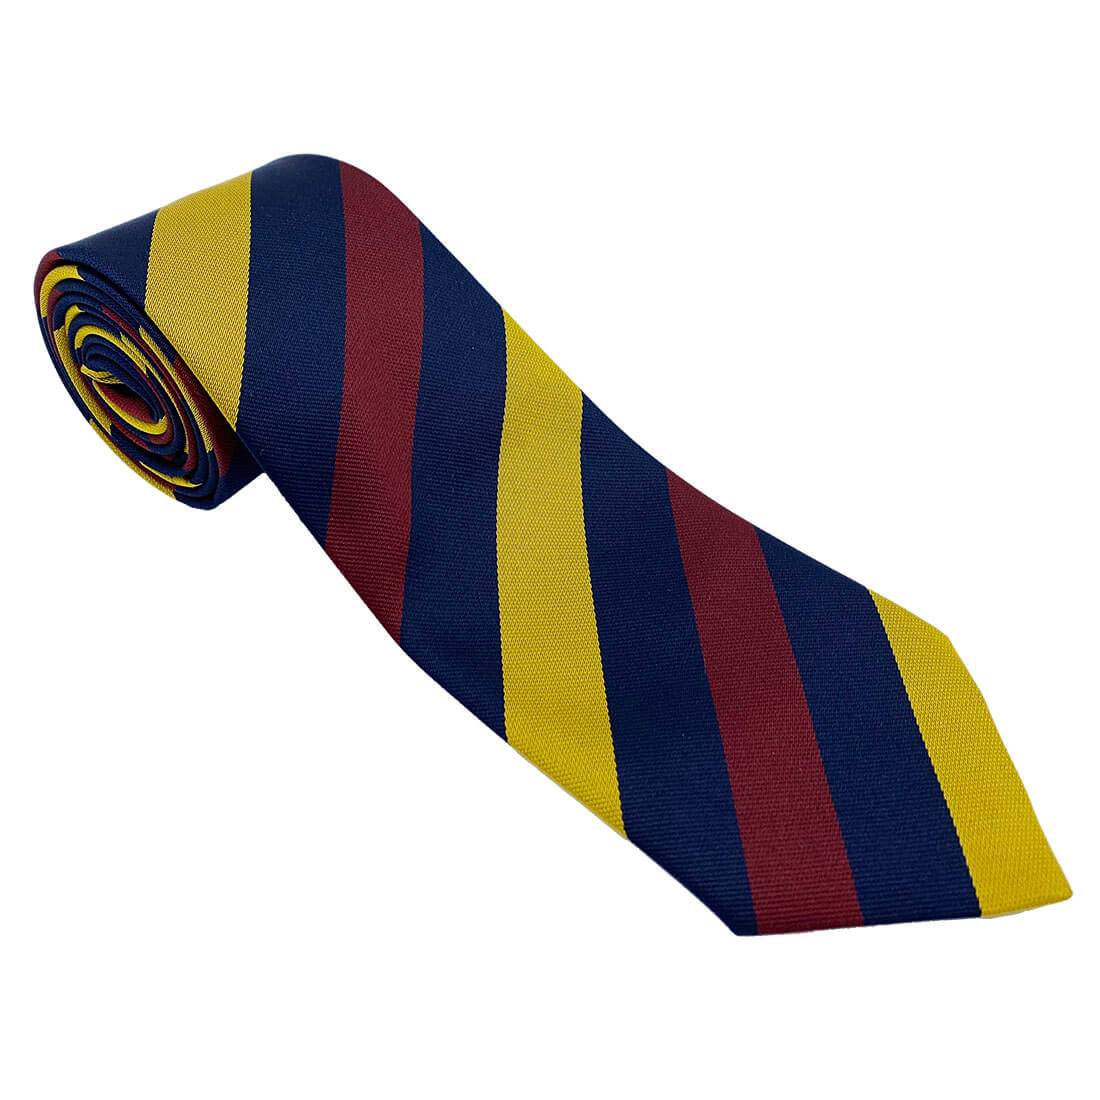 Royal Army Medical Corps Regimental Polyester Tie - John Bull Clothing